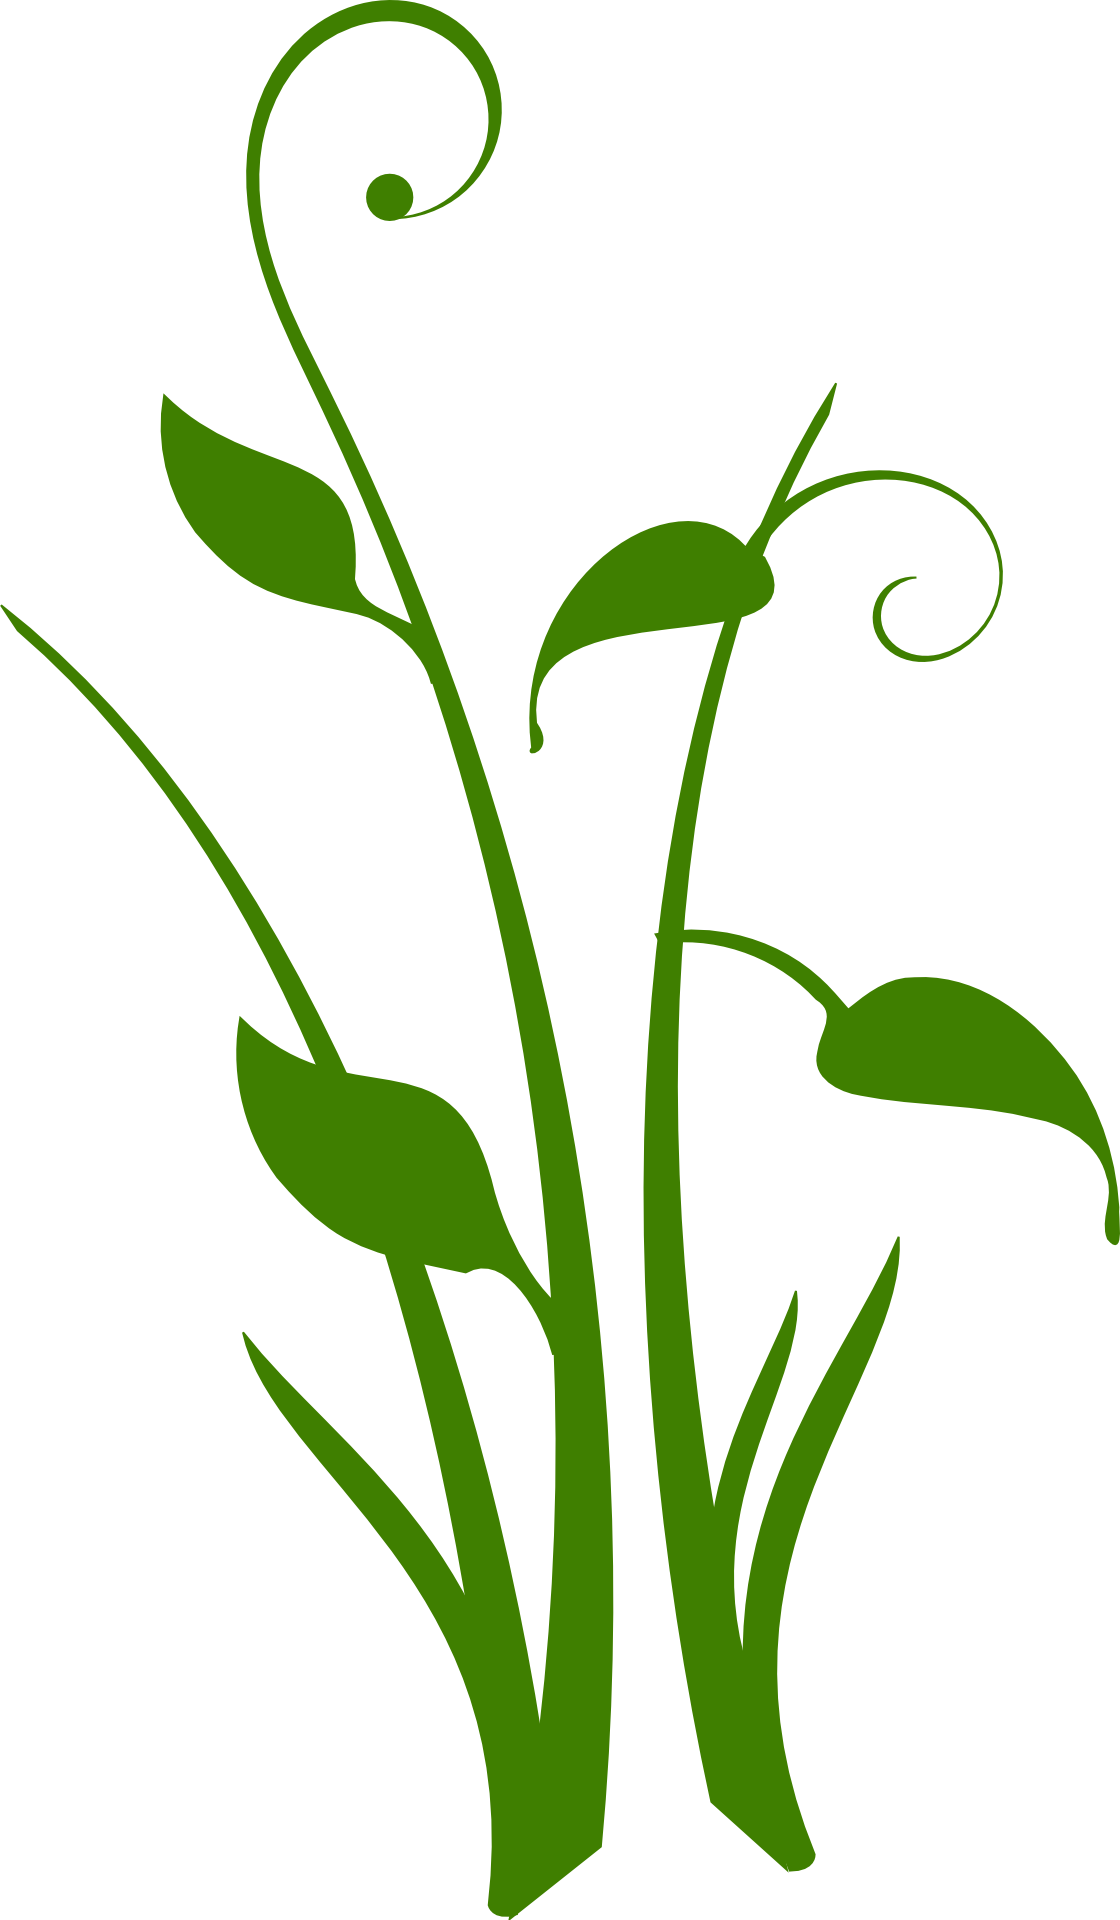 Green plant drawing free image download